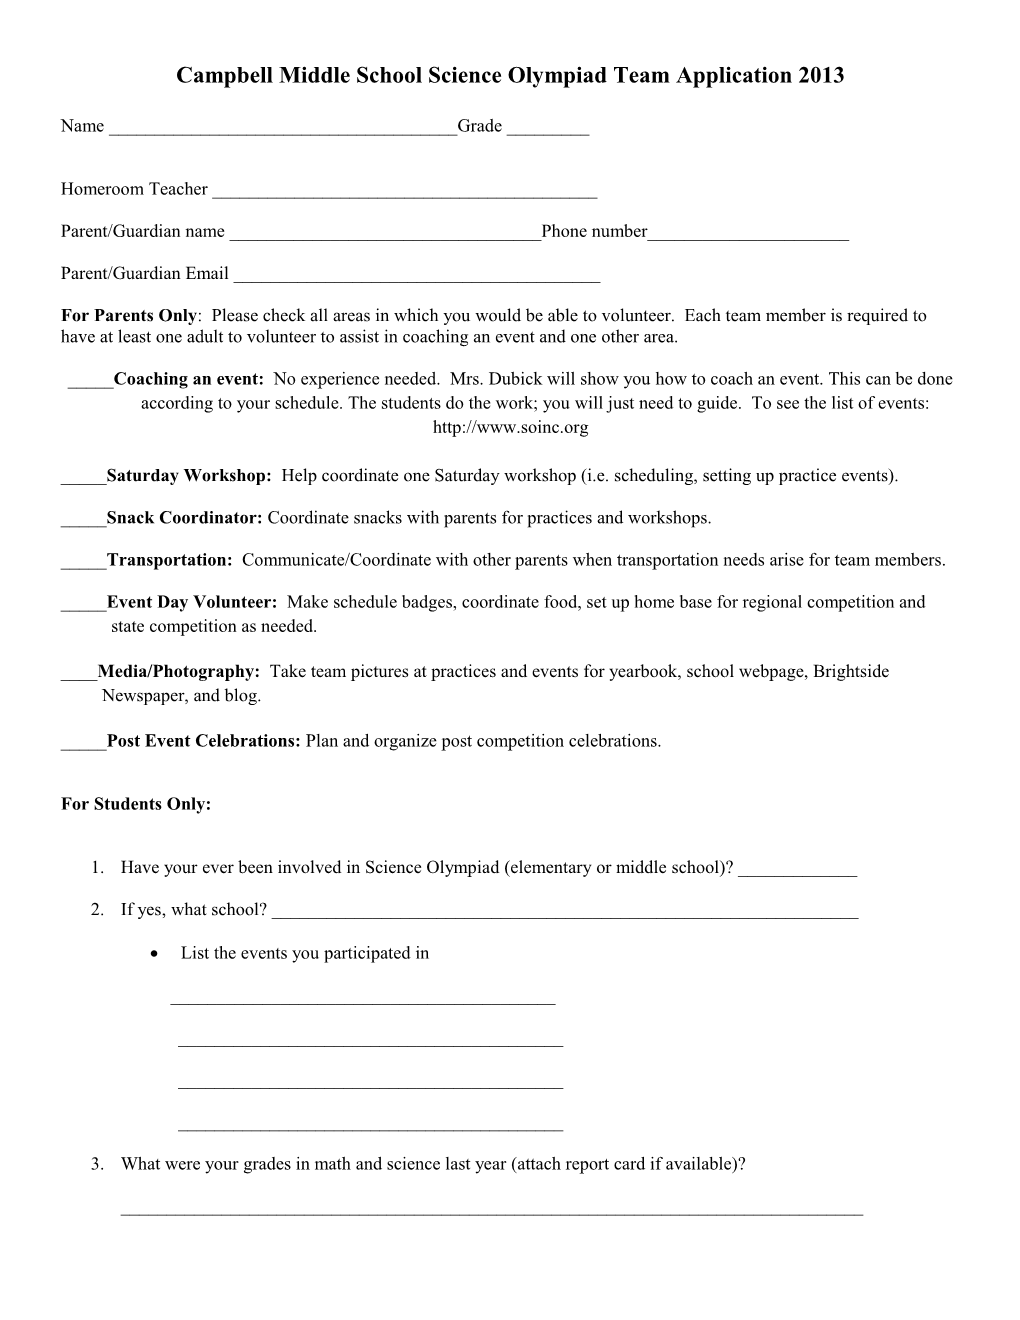 Campbell Middle School Science Olympiad Team Application